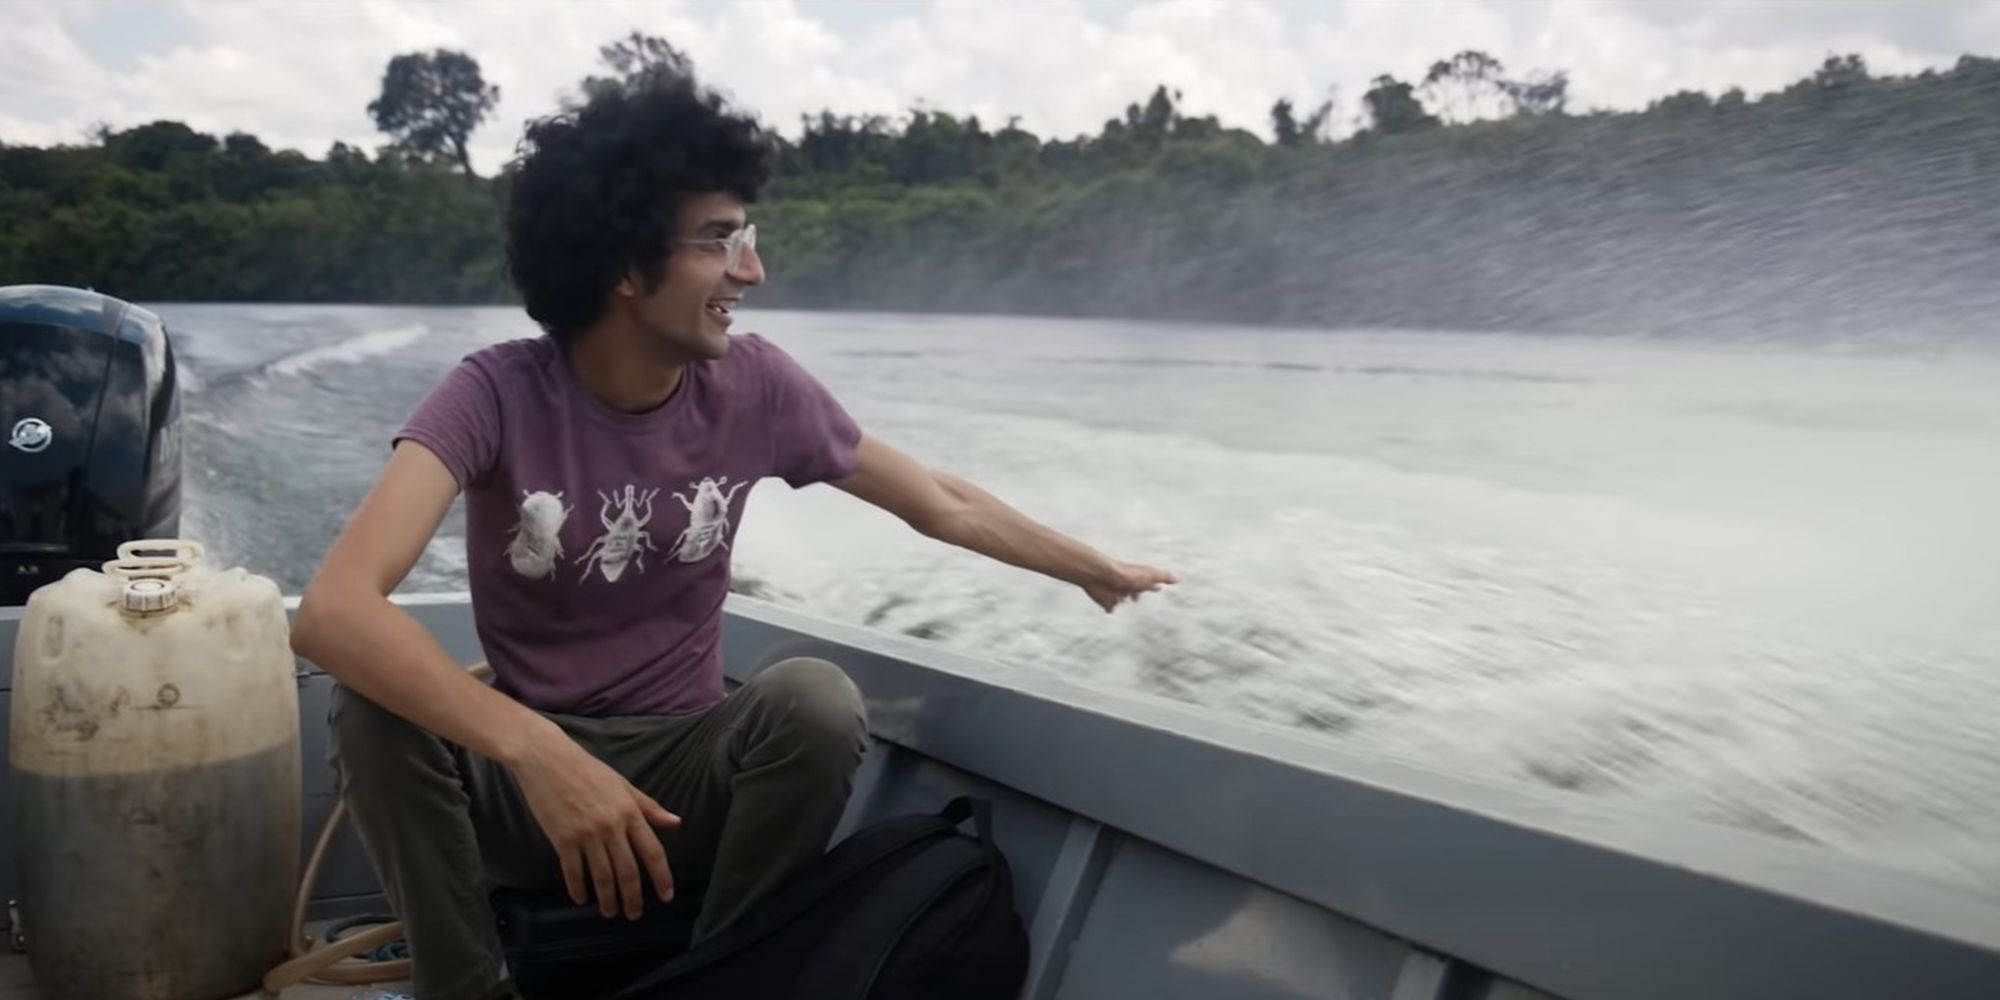 host Latif Nasser in a boat on Connected on Netflix